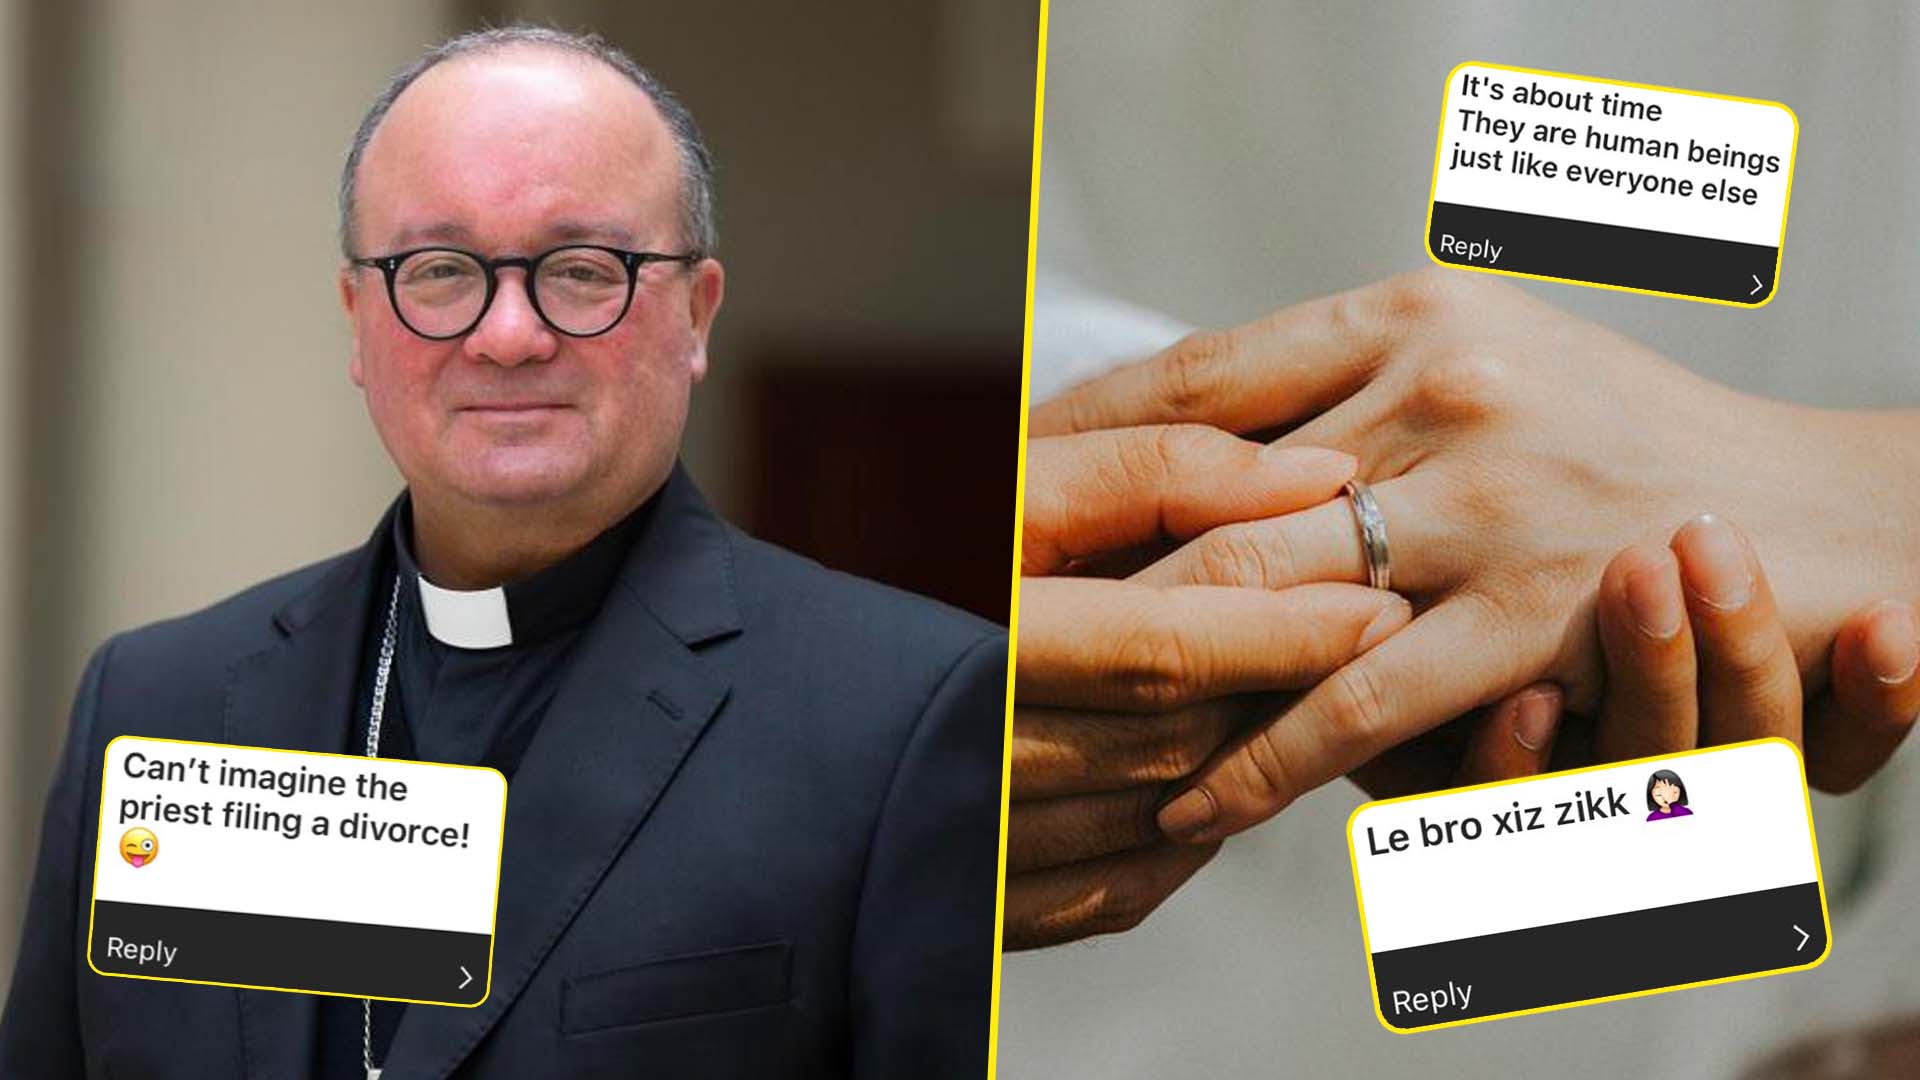 This Is What People Think Of Priests Getting Married